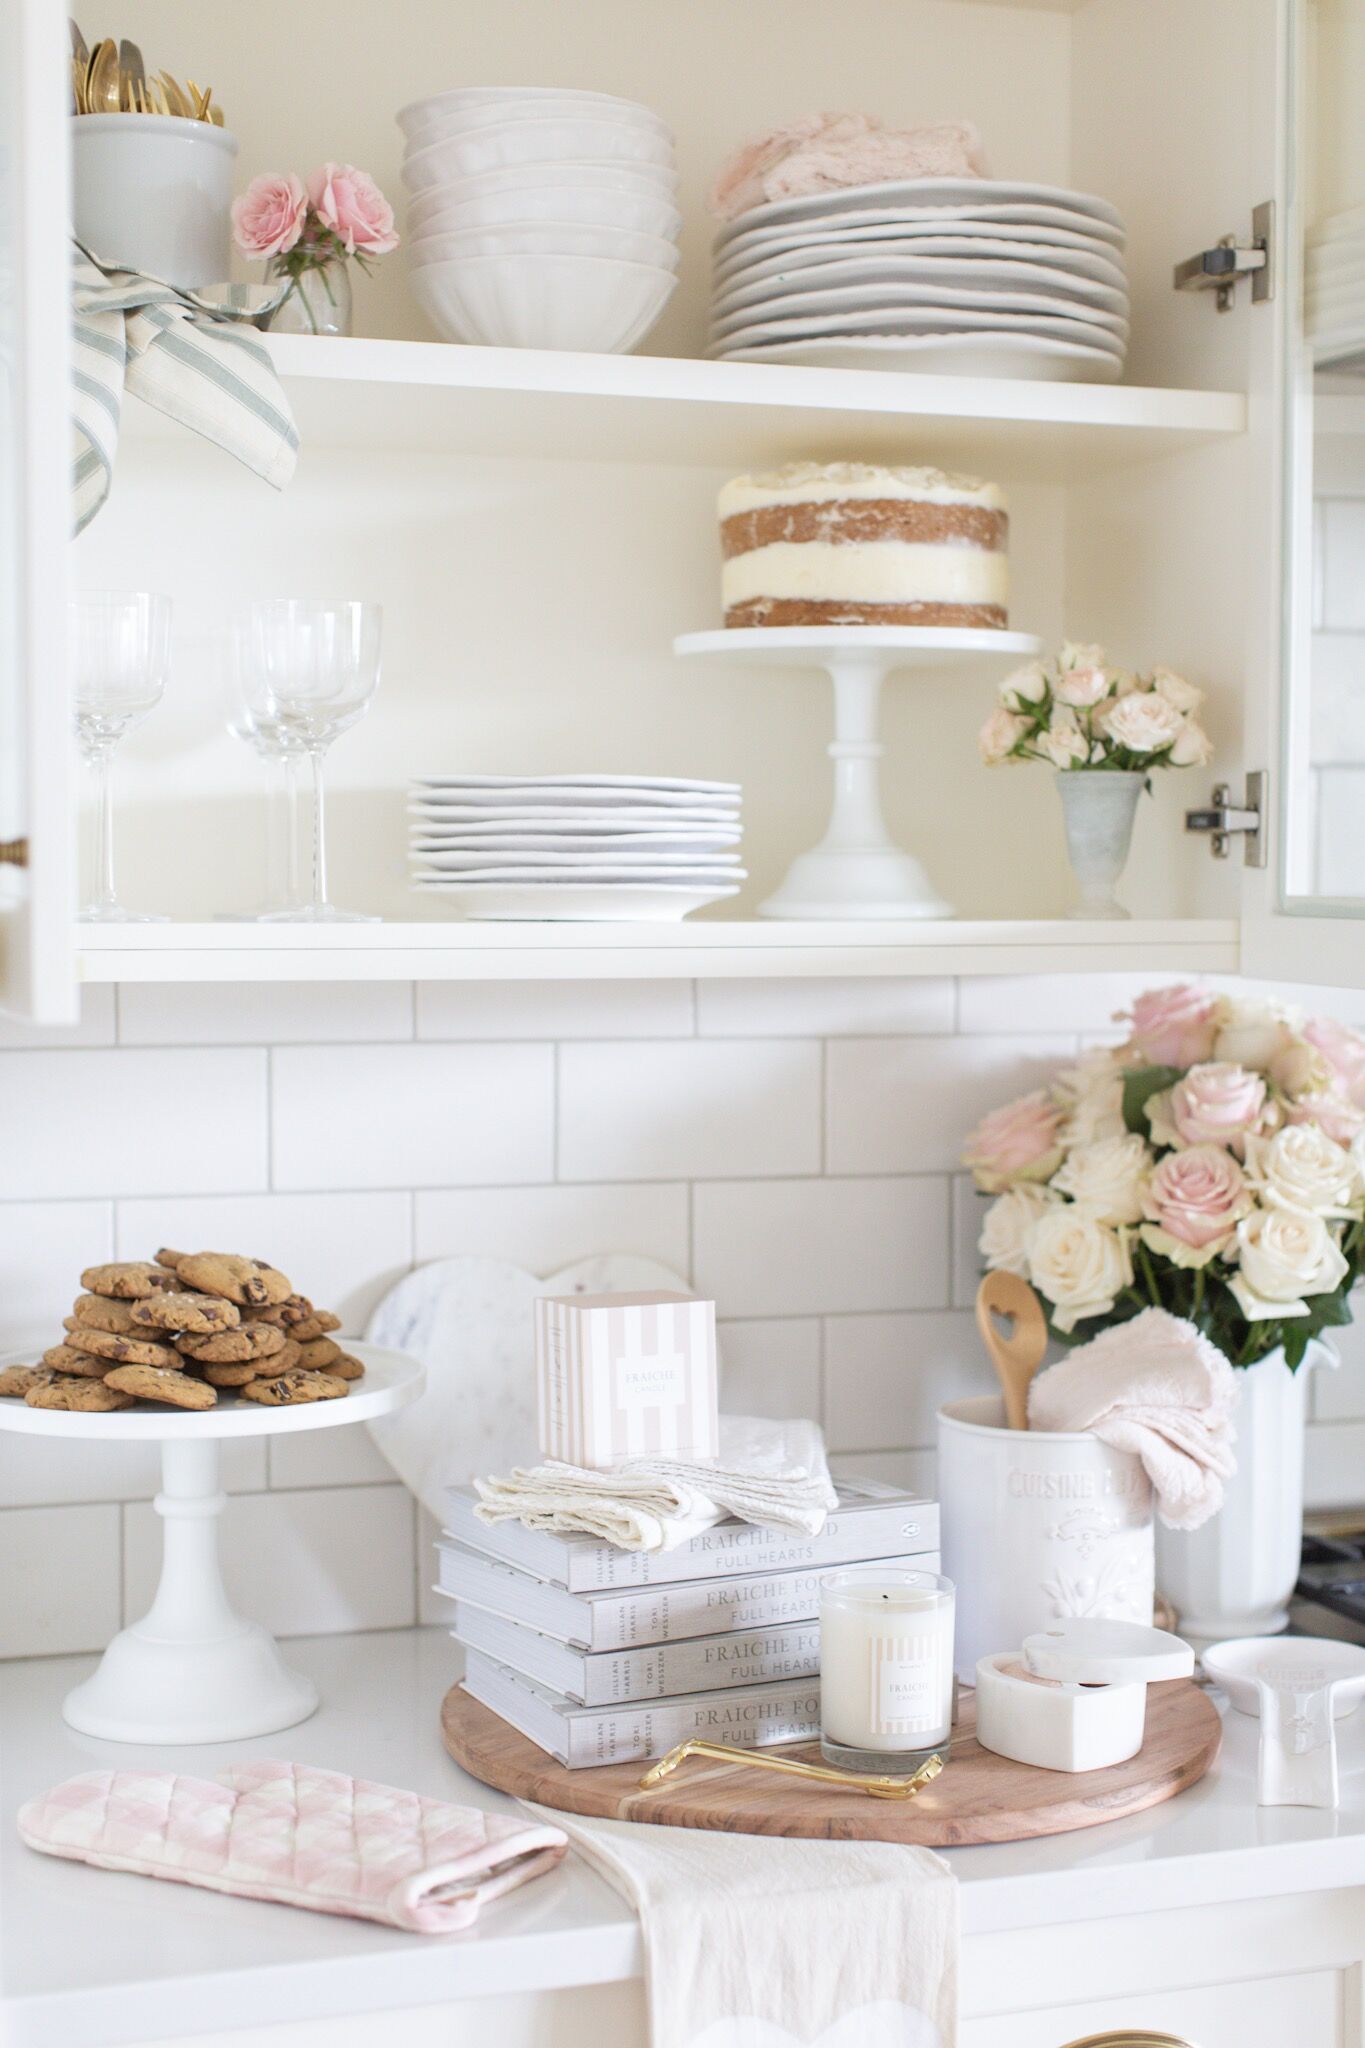 Beautiful Kitchen and Tableware from Tori Wesszer + Jillian Harris's Fraîche Kitchen Collection with the Cross. This stunning seasonal decor makes a perfect gift for the holidays!